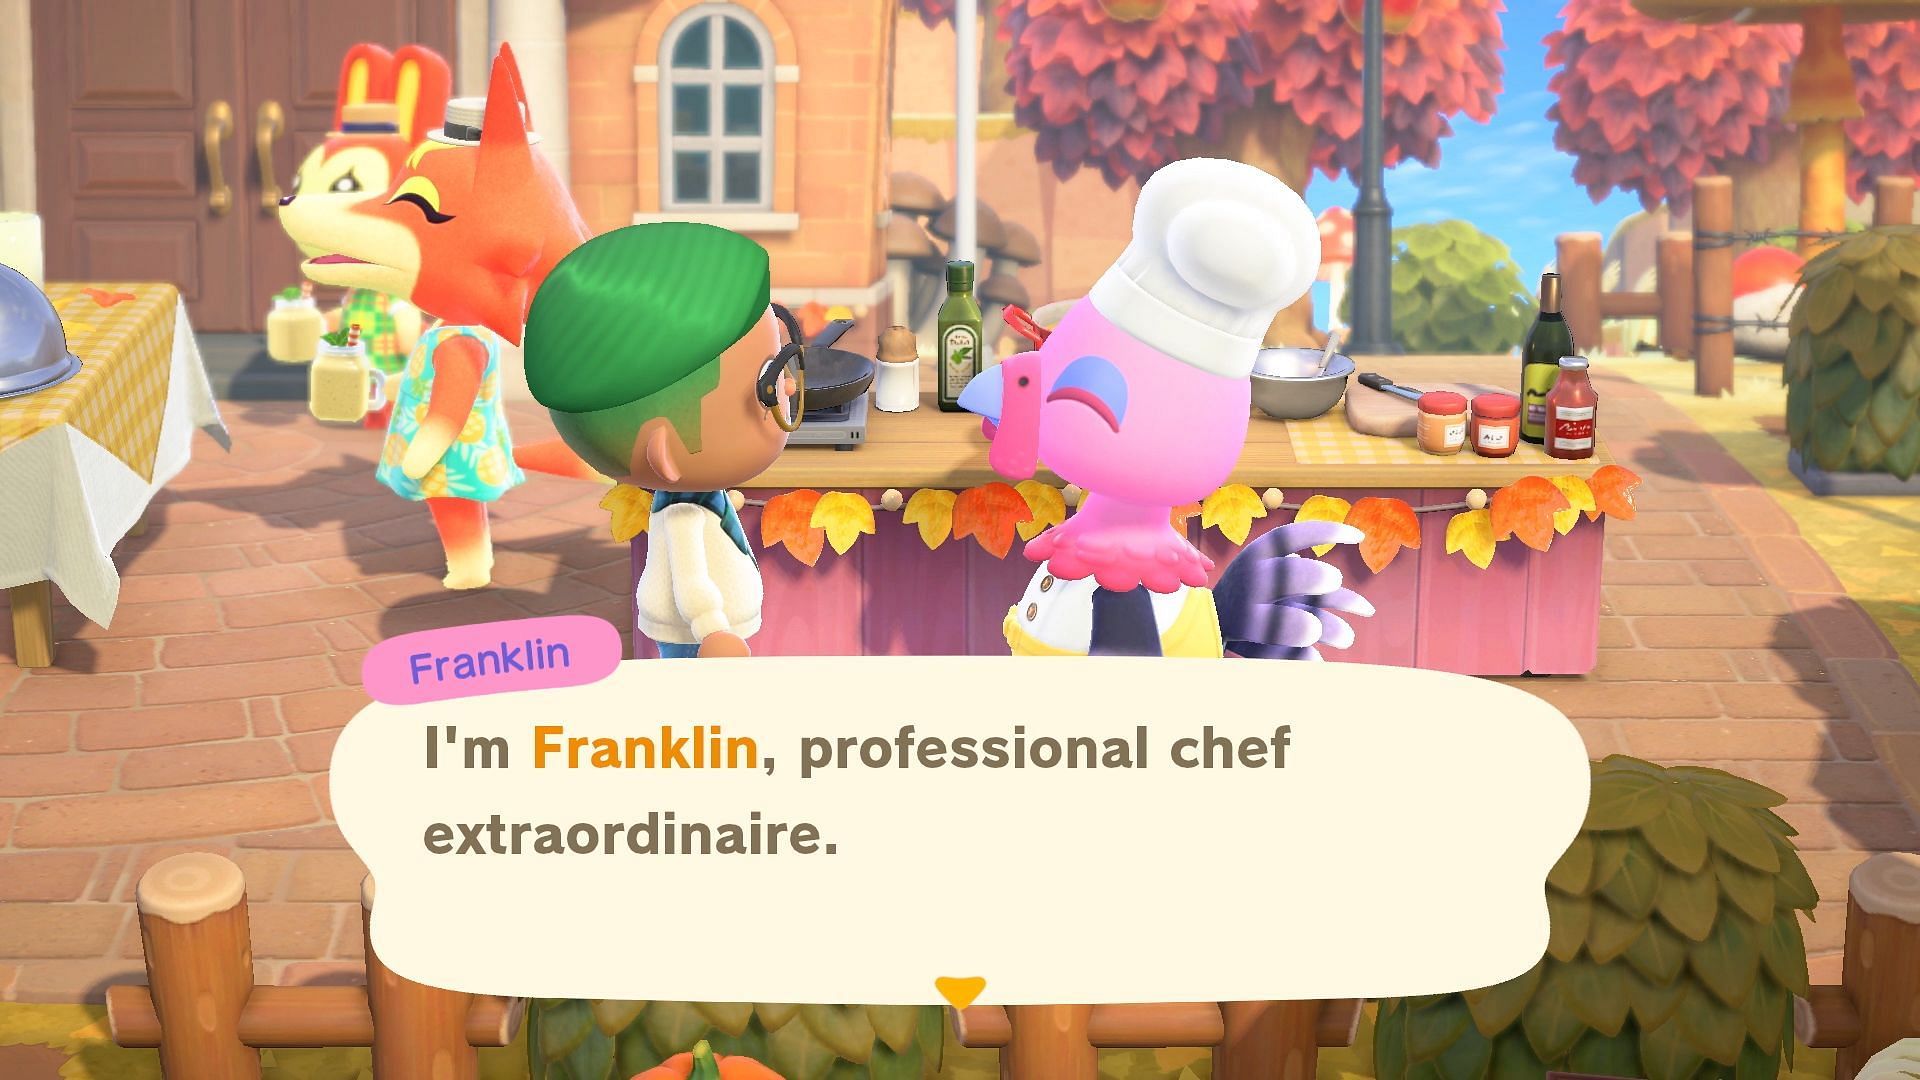 Franklin, the chef, will host the Turkey Day event and all the cooking. (Image via Nintendo)